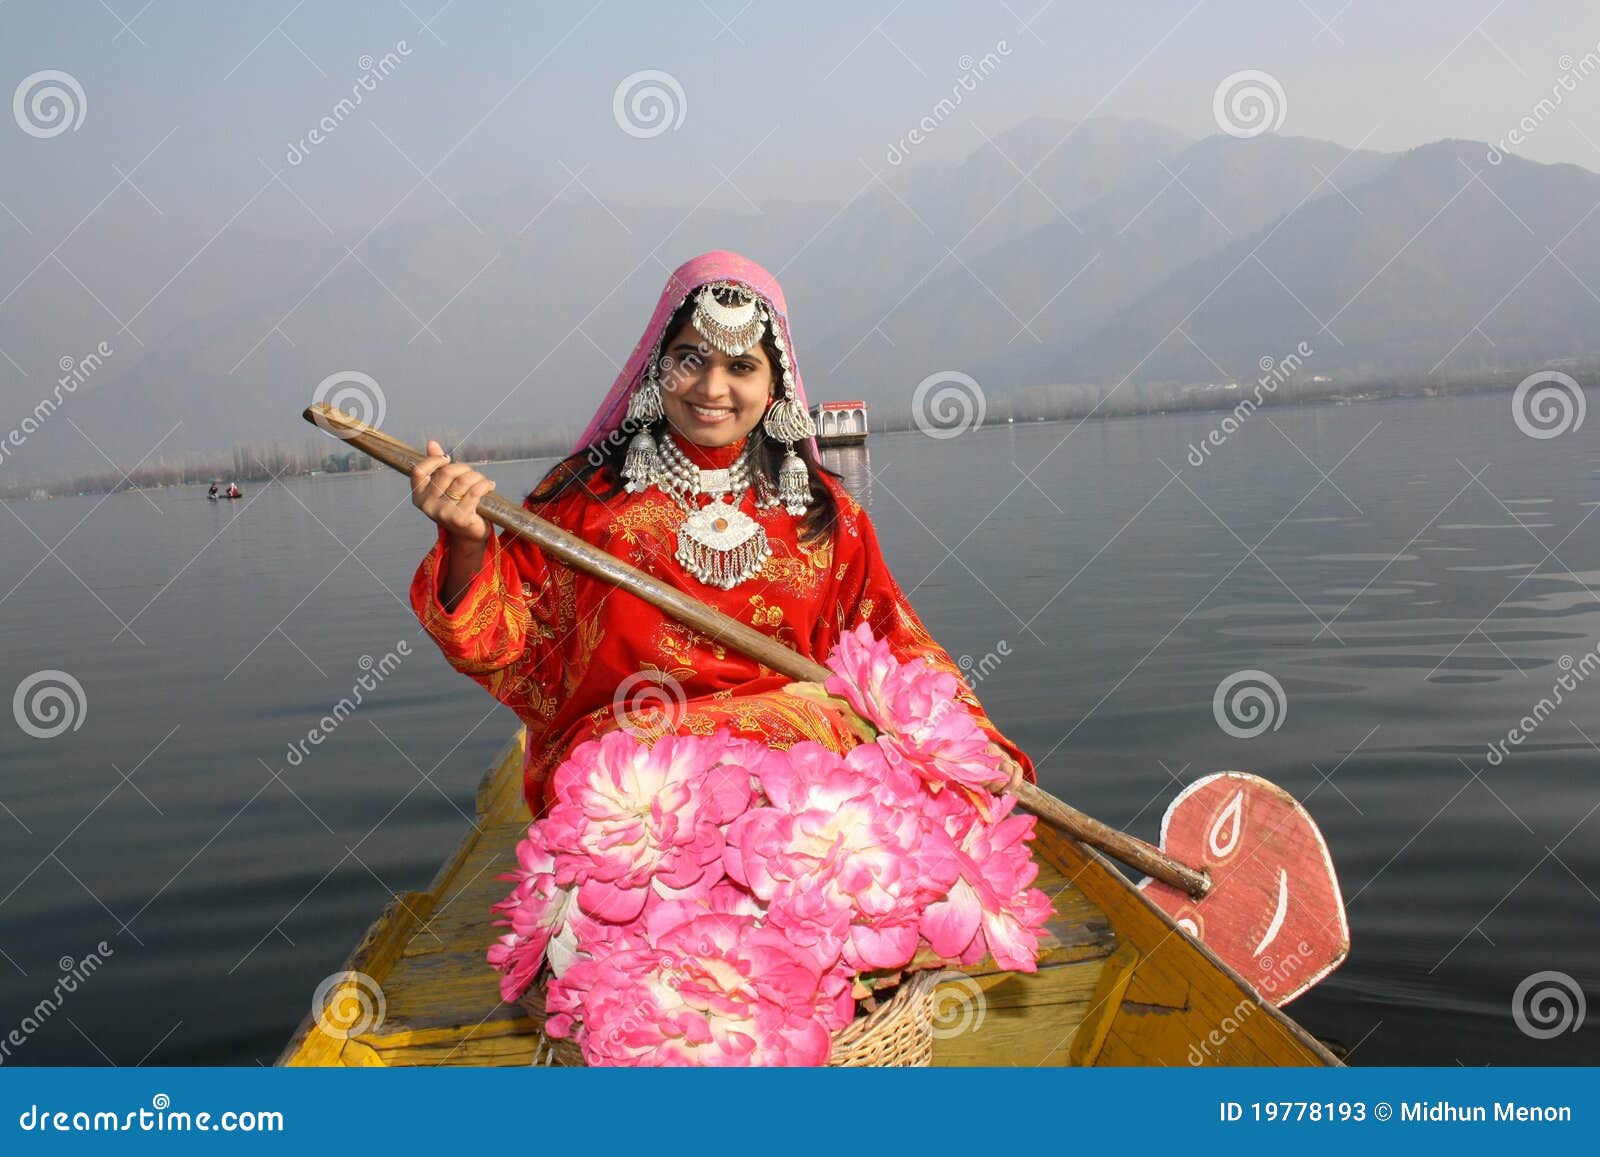 Asian Native Girl Rowing A Boat Stock Image - Image: 19778193